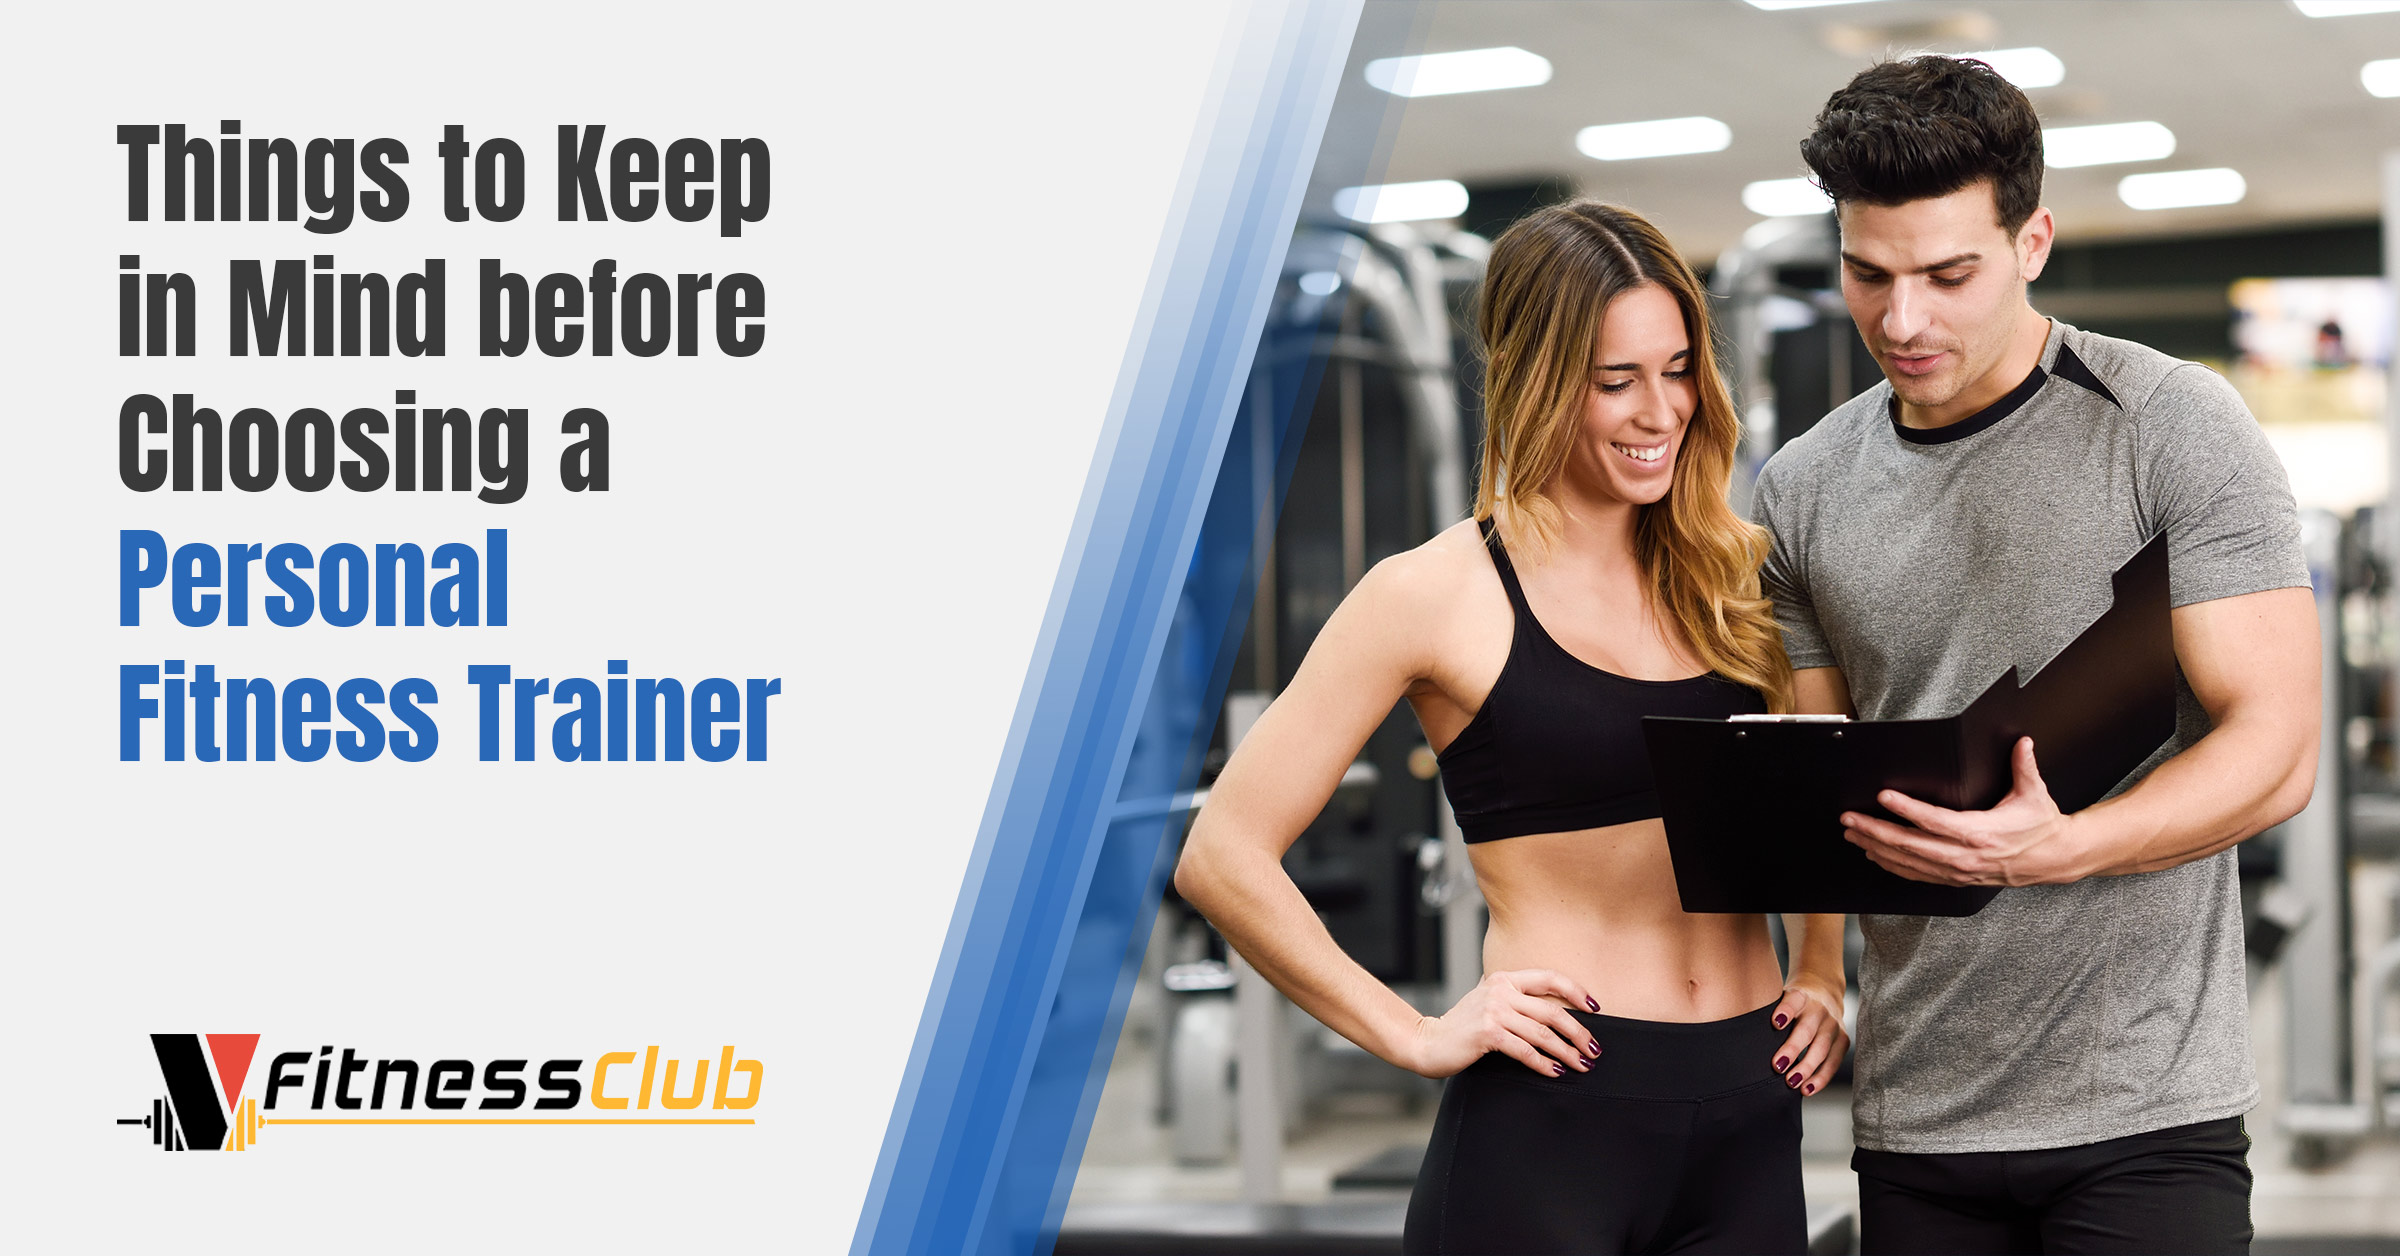 Things to Keep in Mind before Choosing a Personal Fitness Trainer